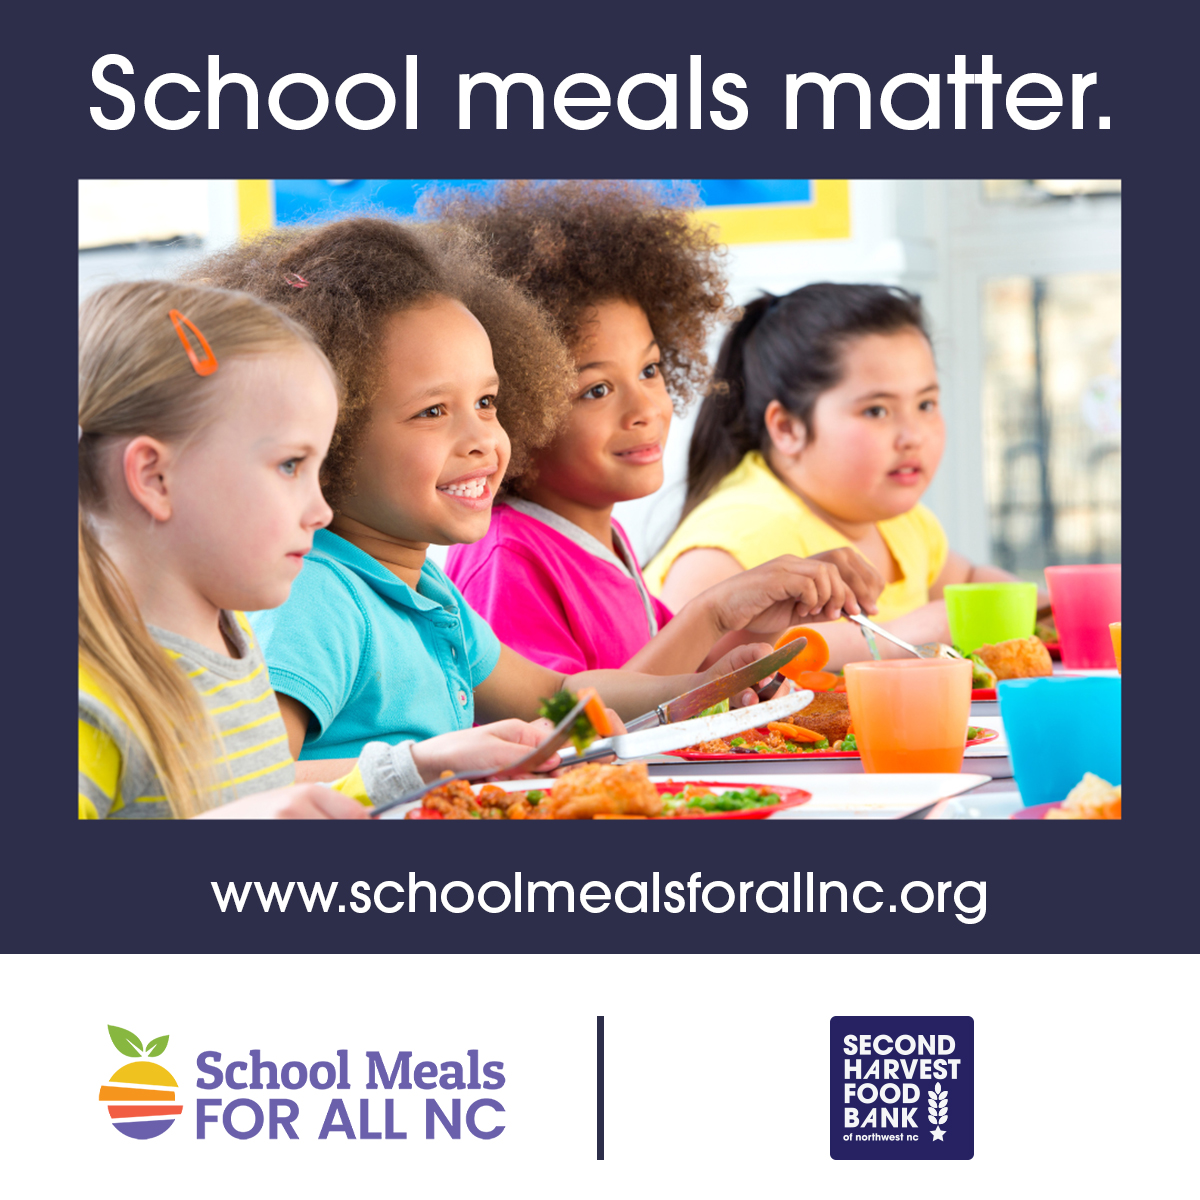 School meals are a big deal! School meals for all at no cost to families is an investment in the community and the economy. #SchoolMealsforAllNC #ncpol #ISMD2023 schoolmealsforallnc.org